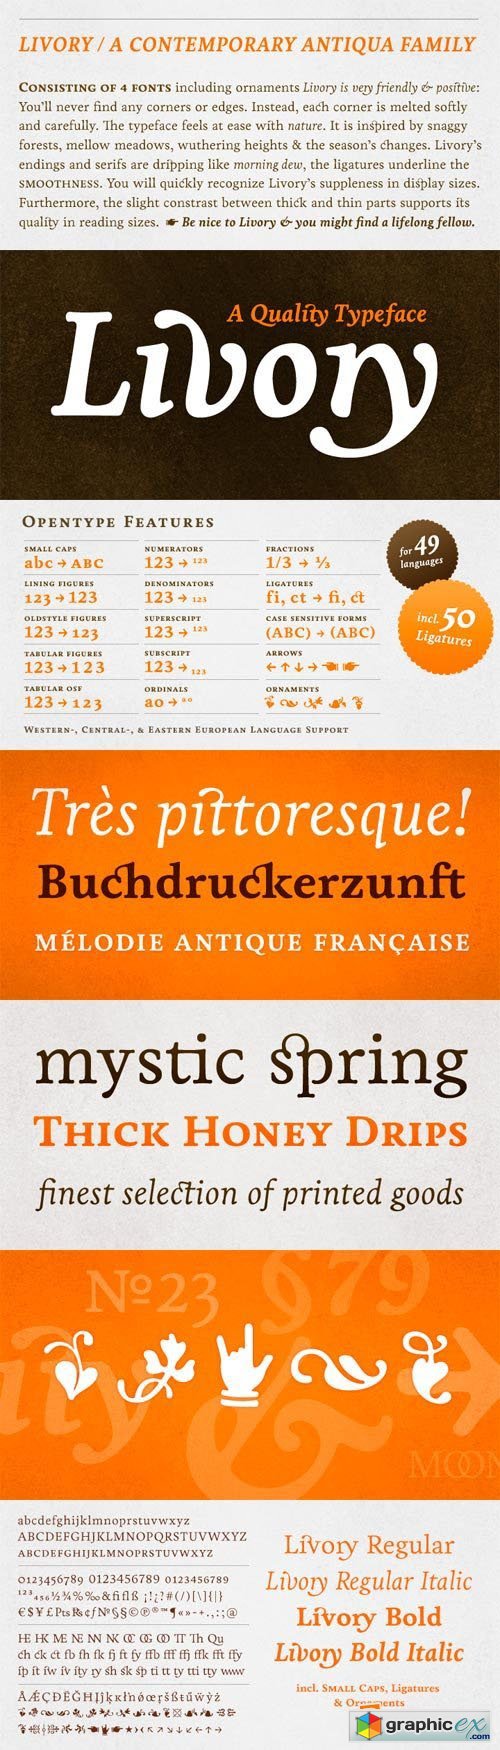 Livory Font Family - 4 Fonts for $129